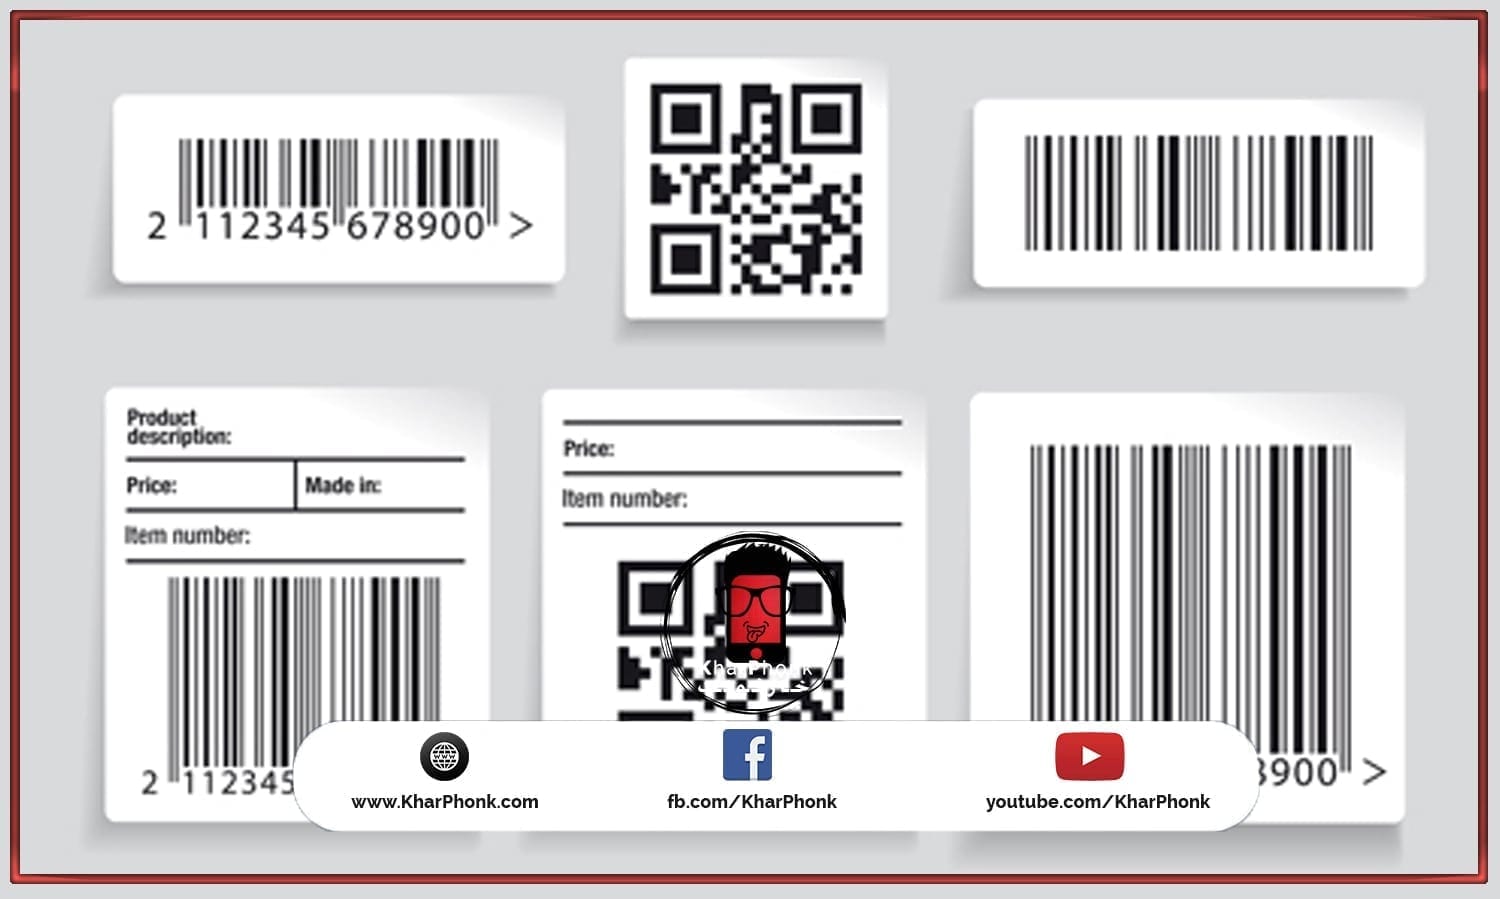 barcode types